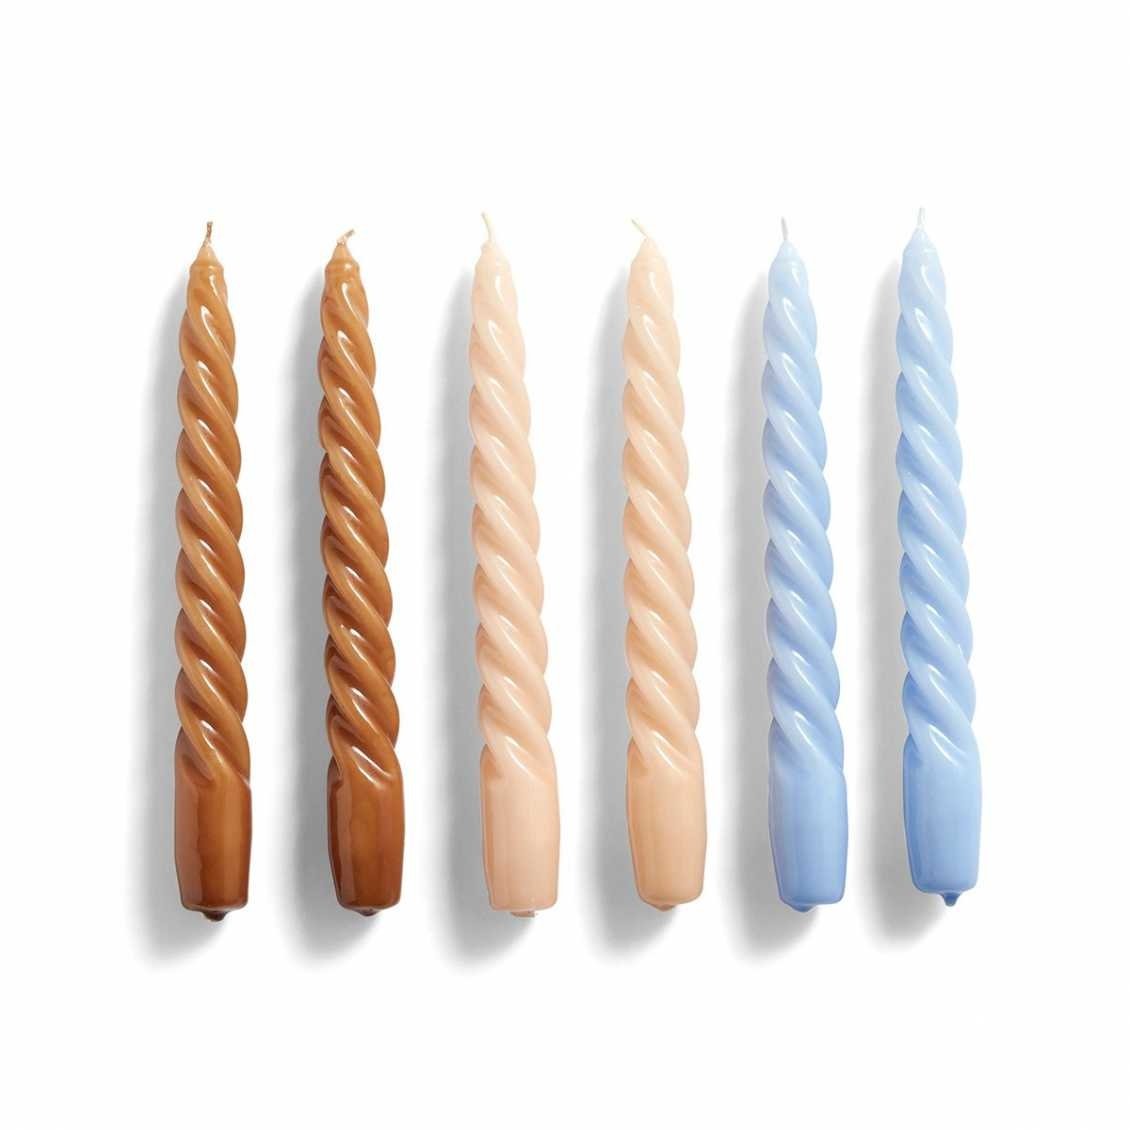 HAY Candle twisted - set of six - Caramel/Peach/Lavender